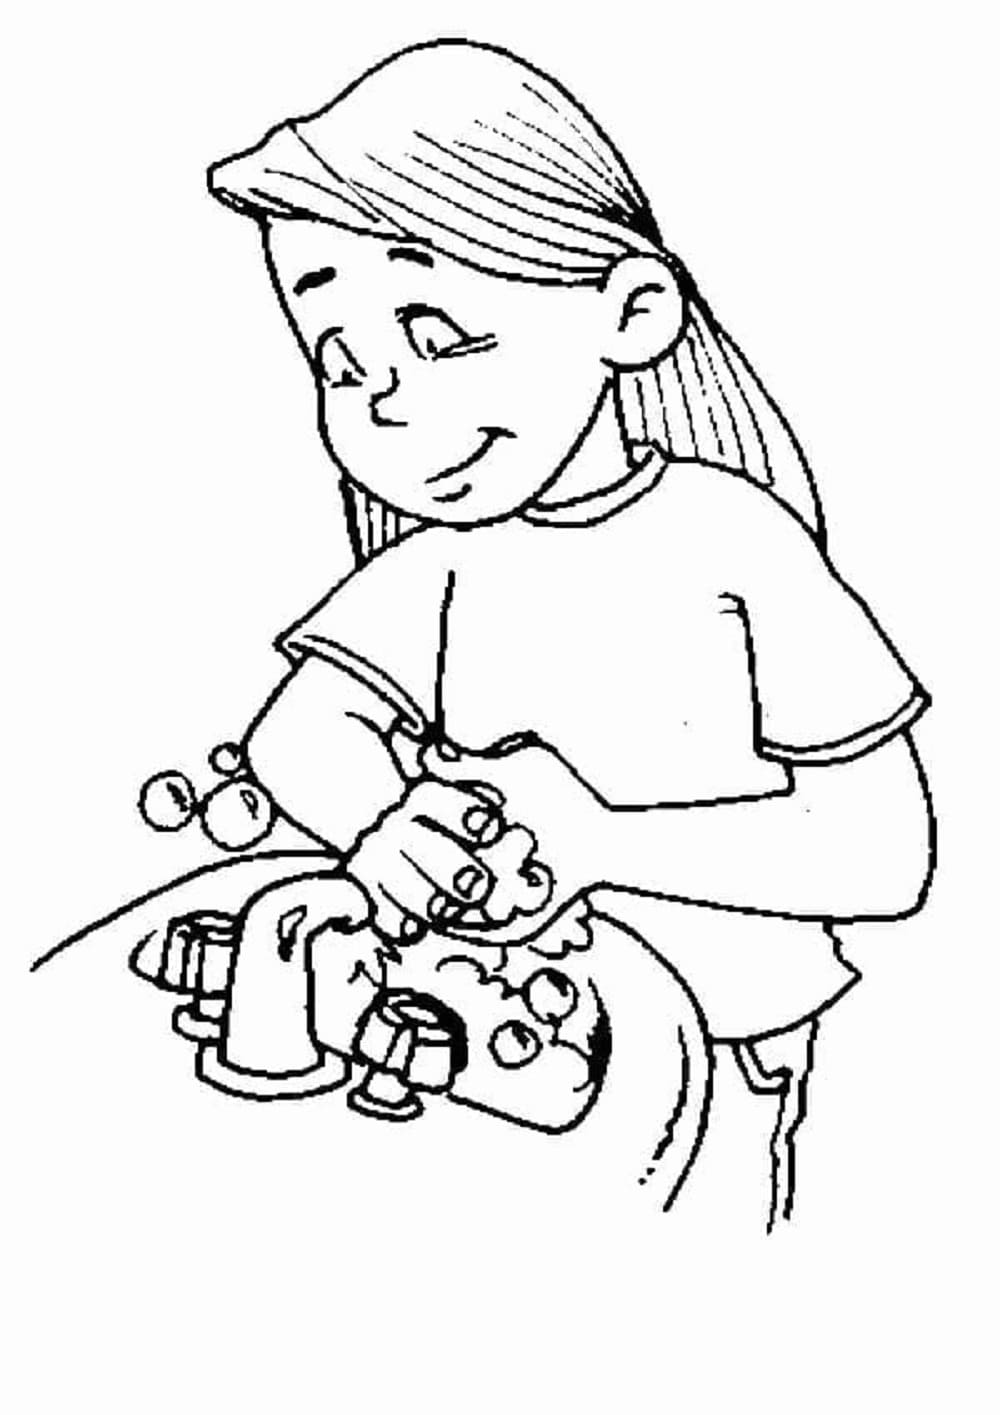 Printable Practice Good Hygiene Coloring Page